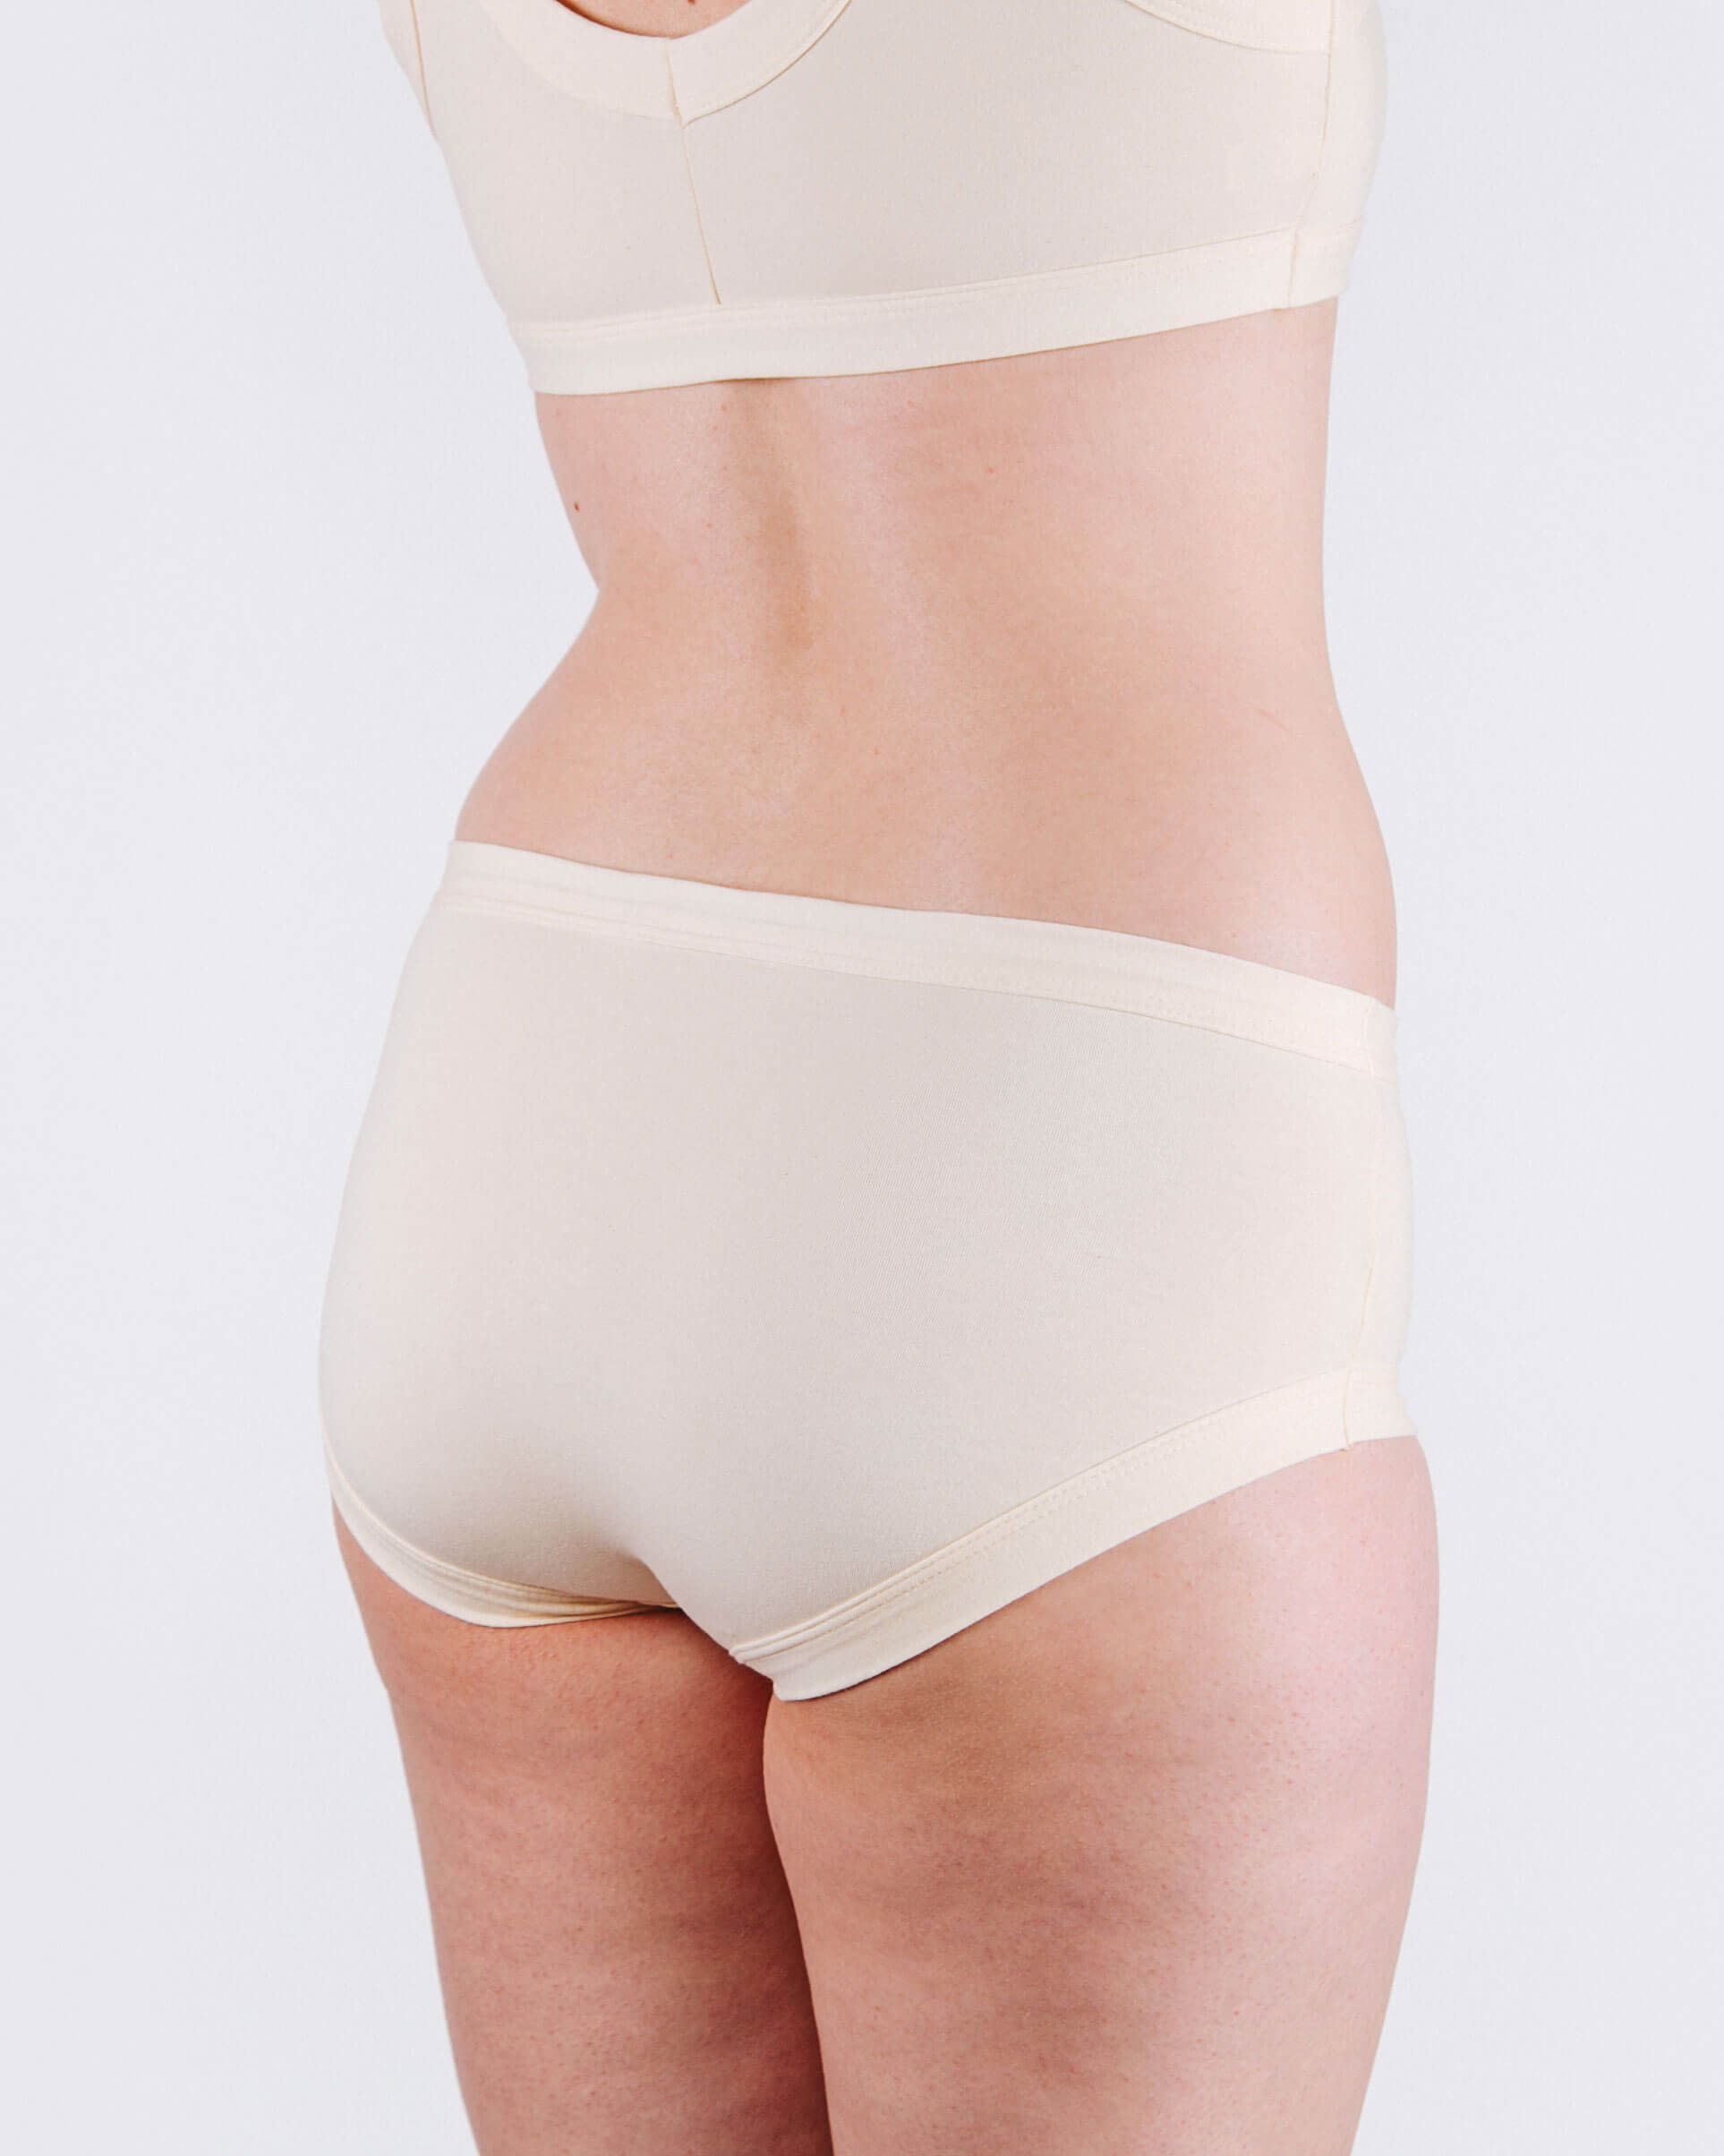 Fit photo from the back of Thunderpants organic cotton Hipster style underwear in off-white vanilla, showing a wedgie-free bum, on a model.